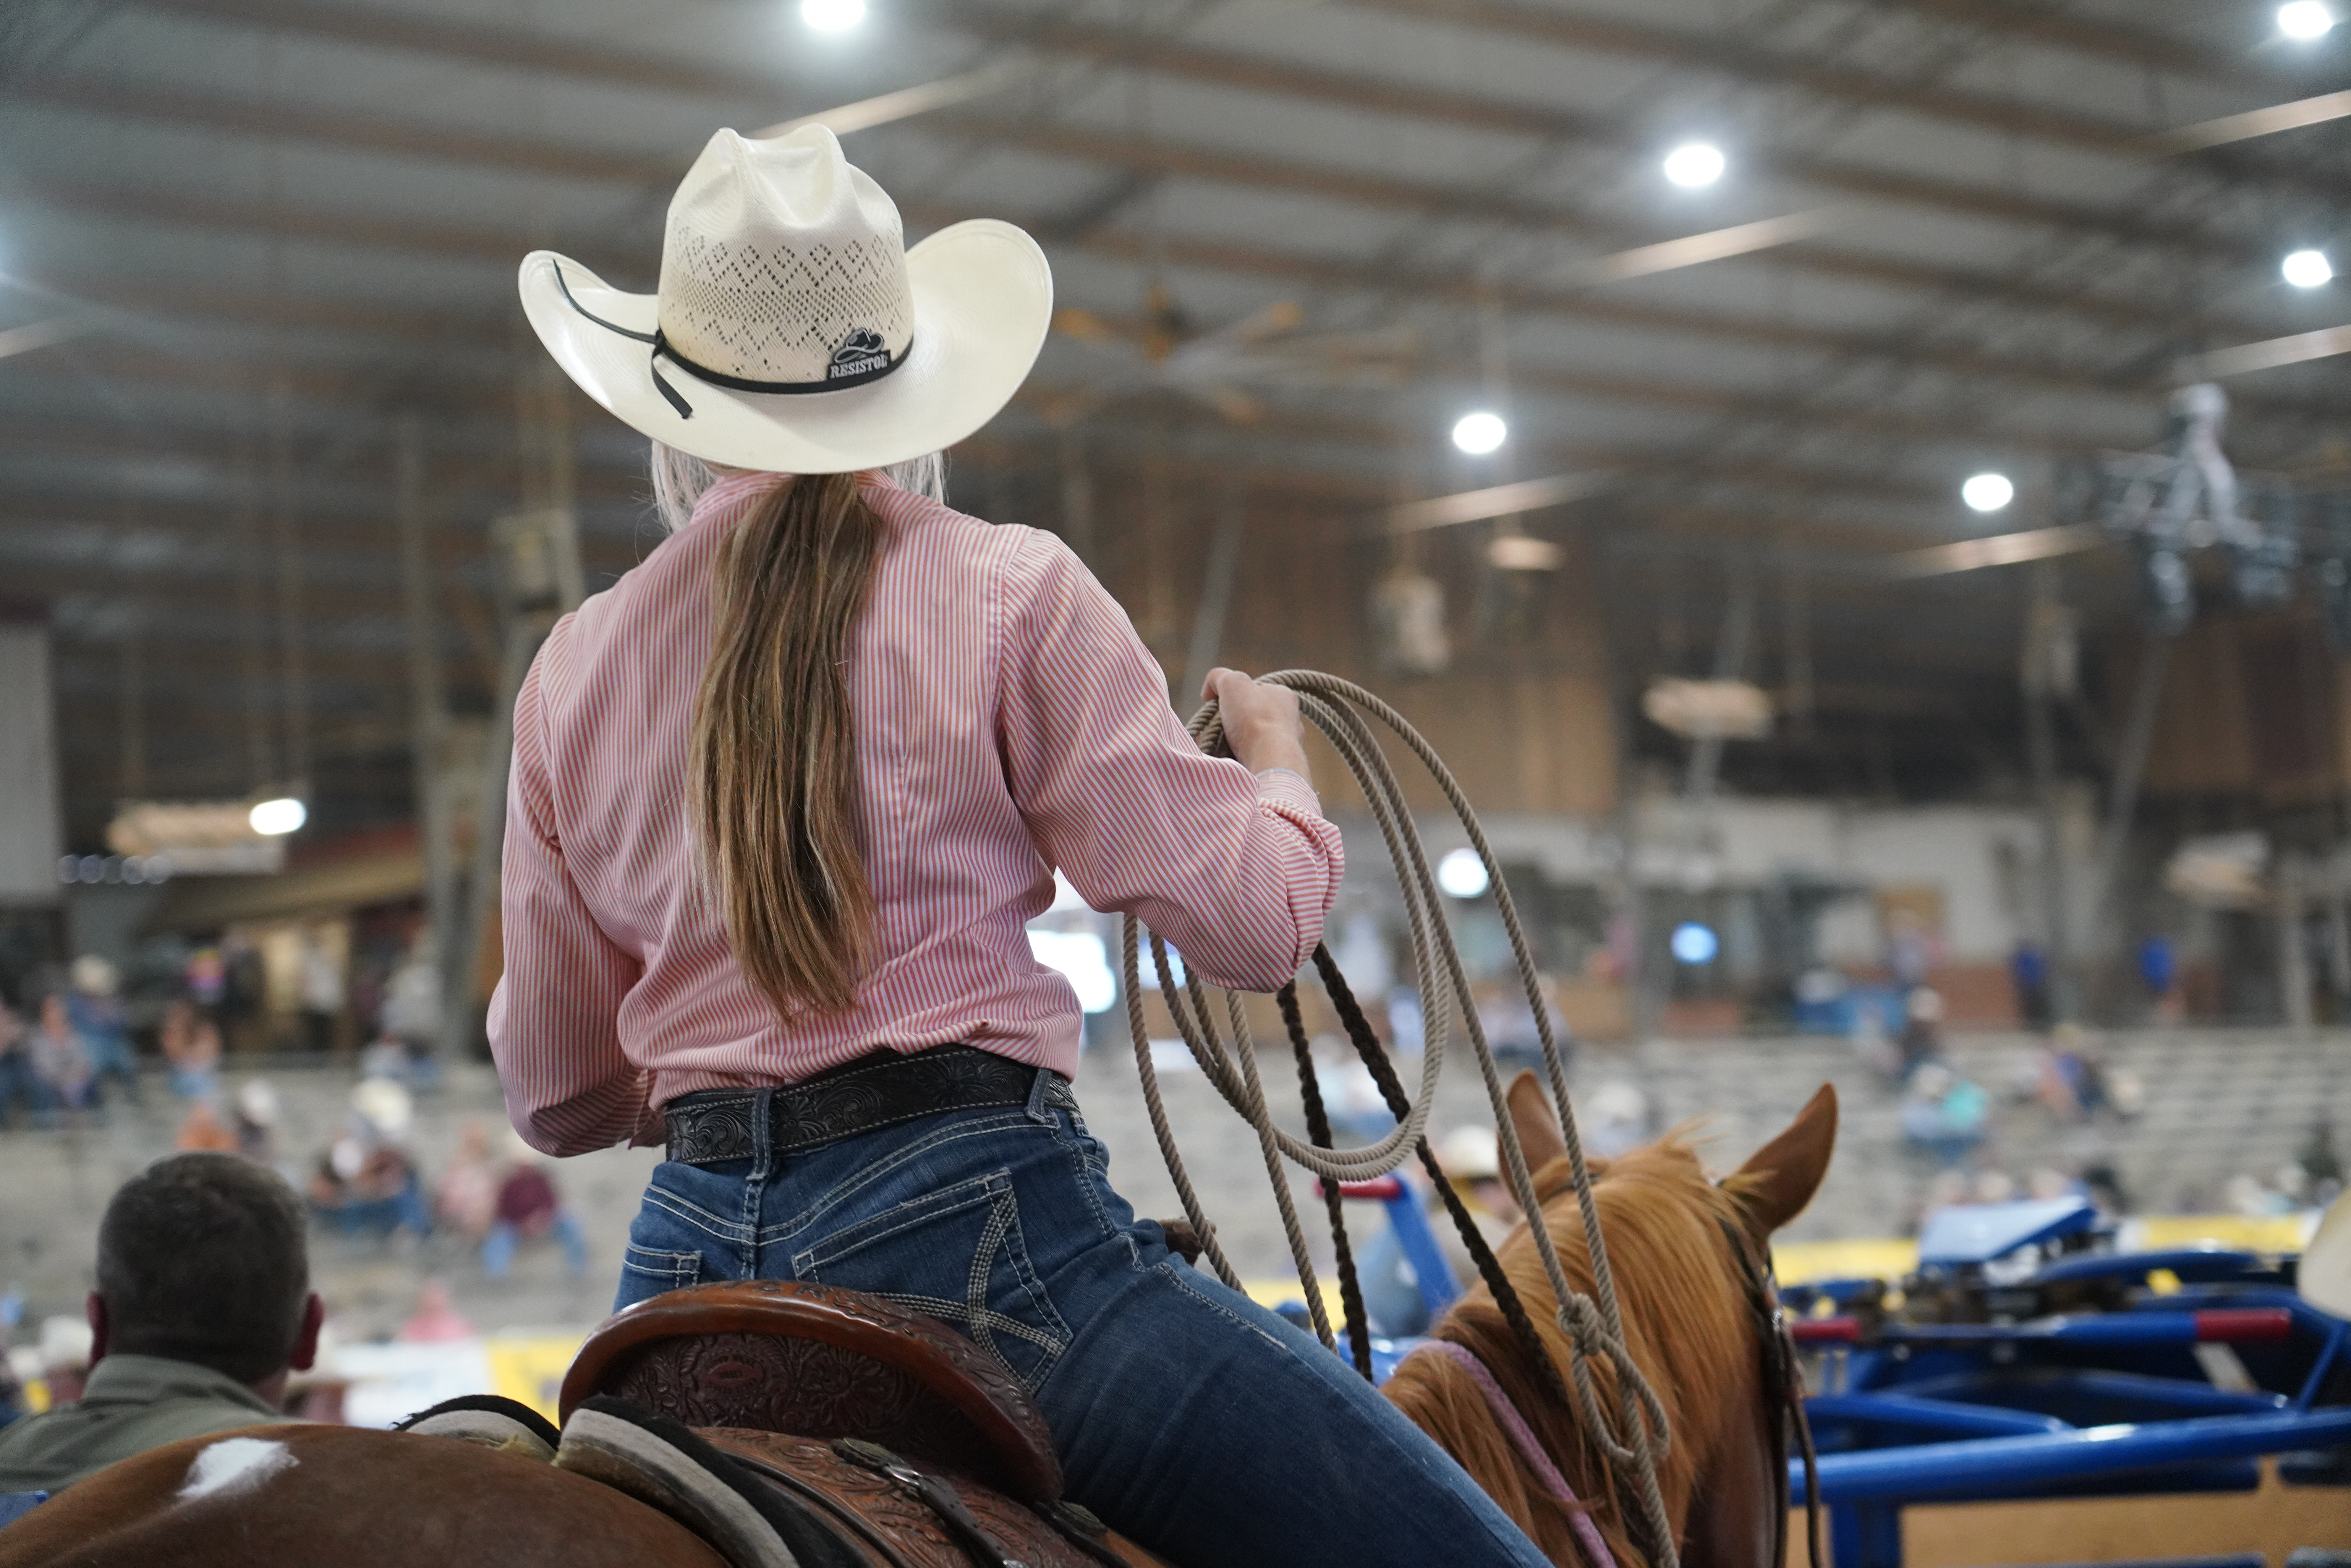 A breakaway roper prepares to rope at a rodeo.